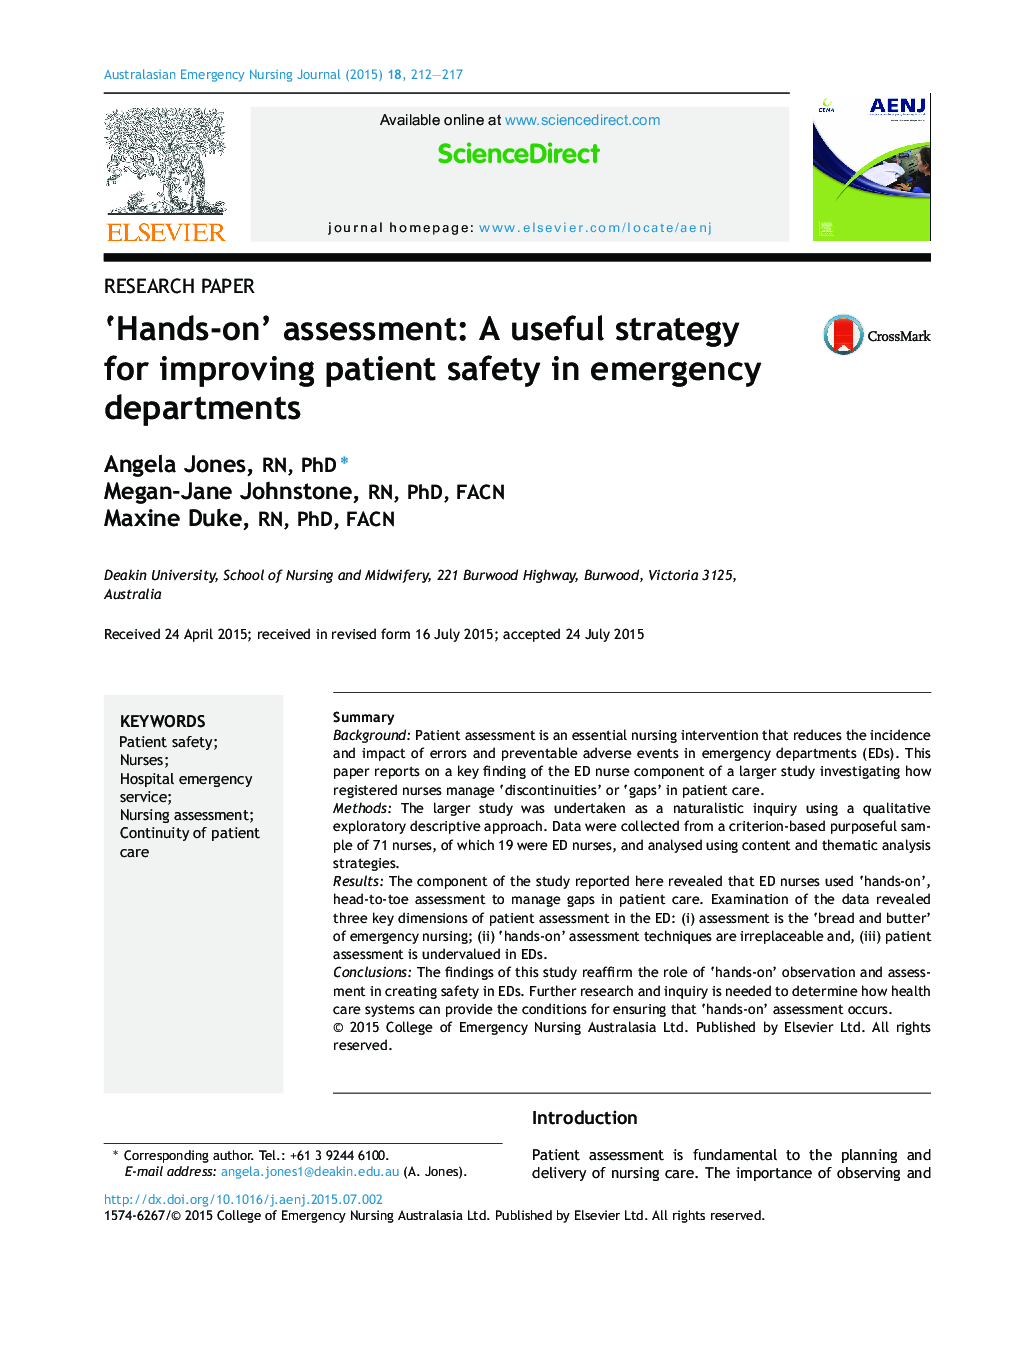 ‘Hands-on’ assessment: A useful strategy for improving patient safety in emergency departments